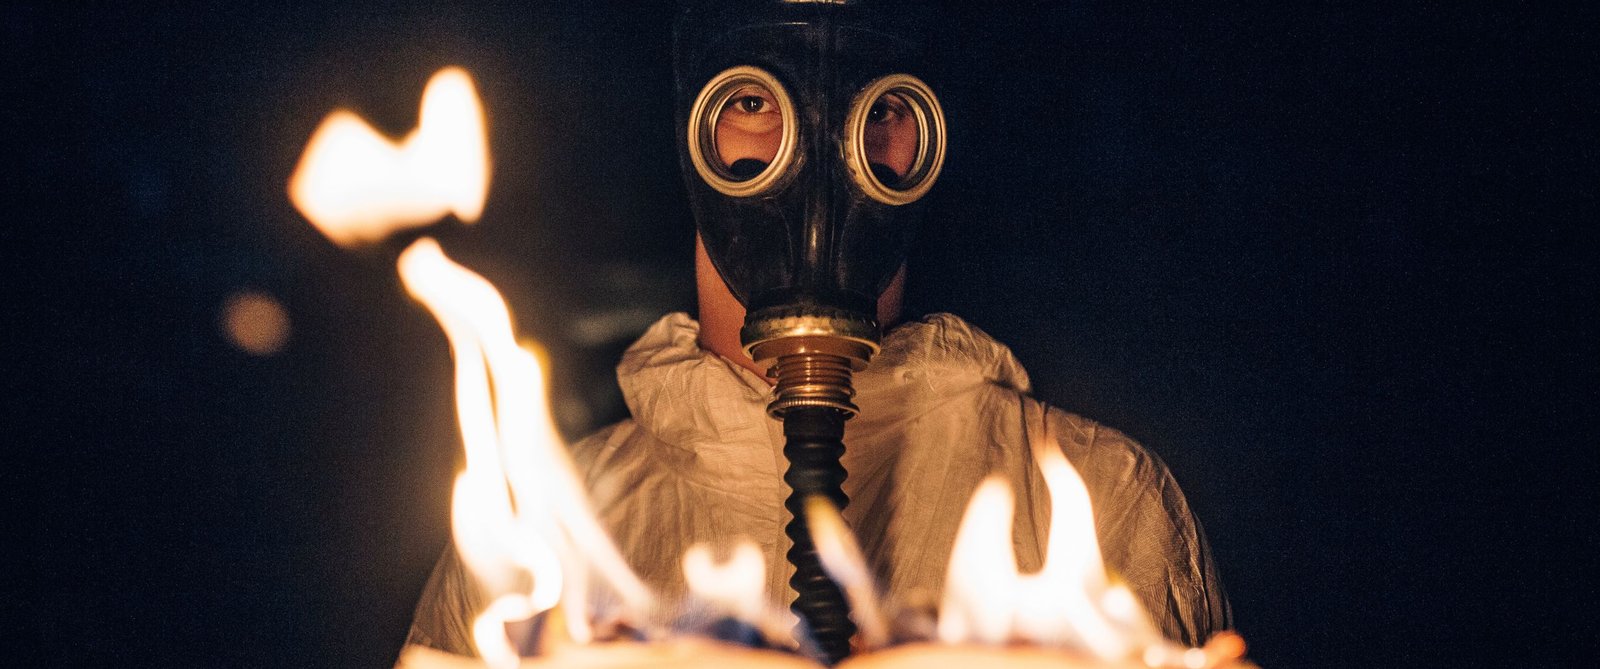 How to Safely Wear GP5 Gas Mask: Step-by-Step Guide?